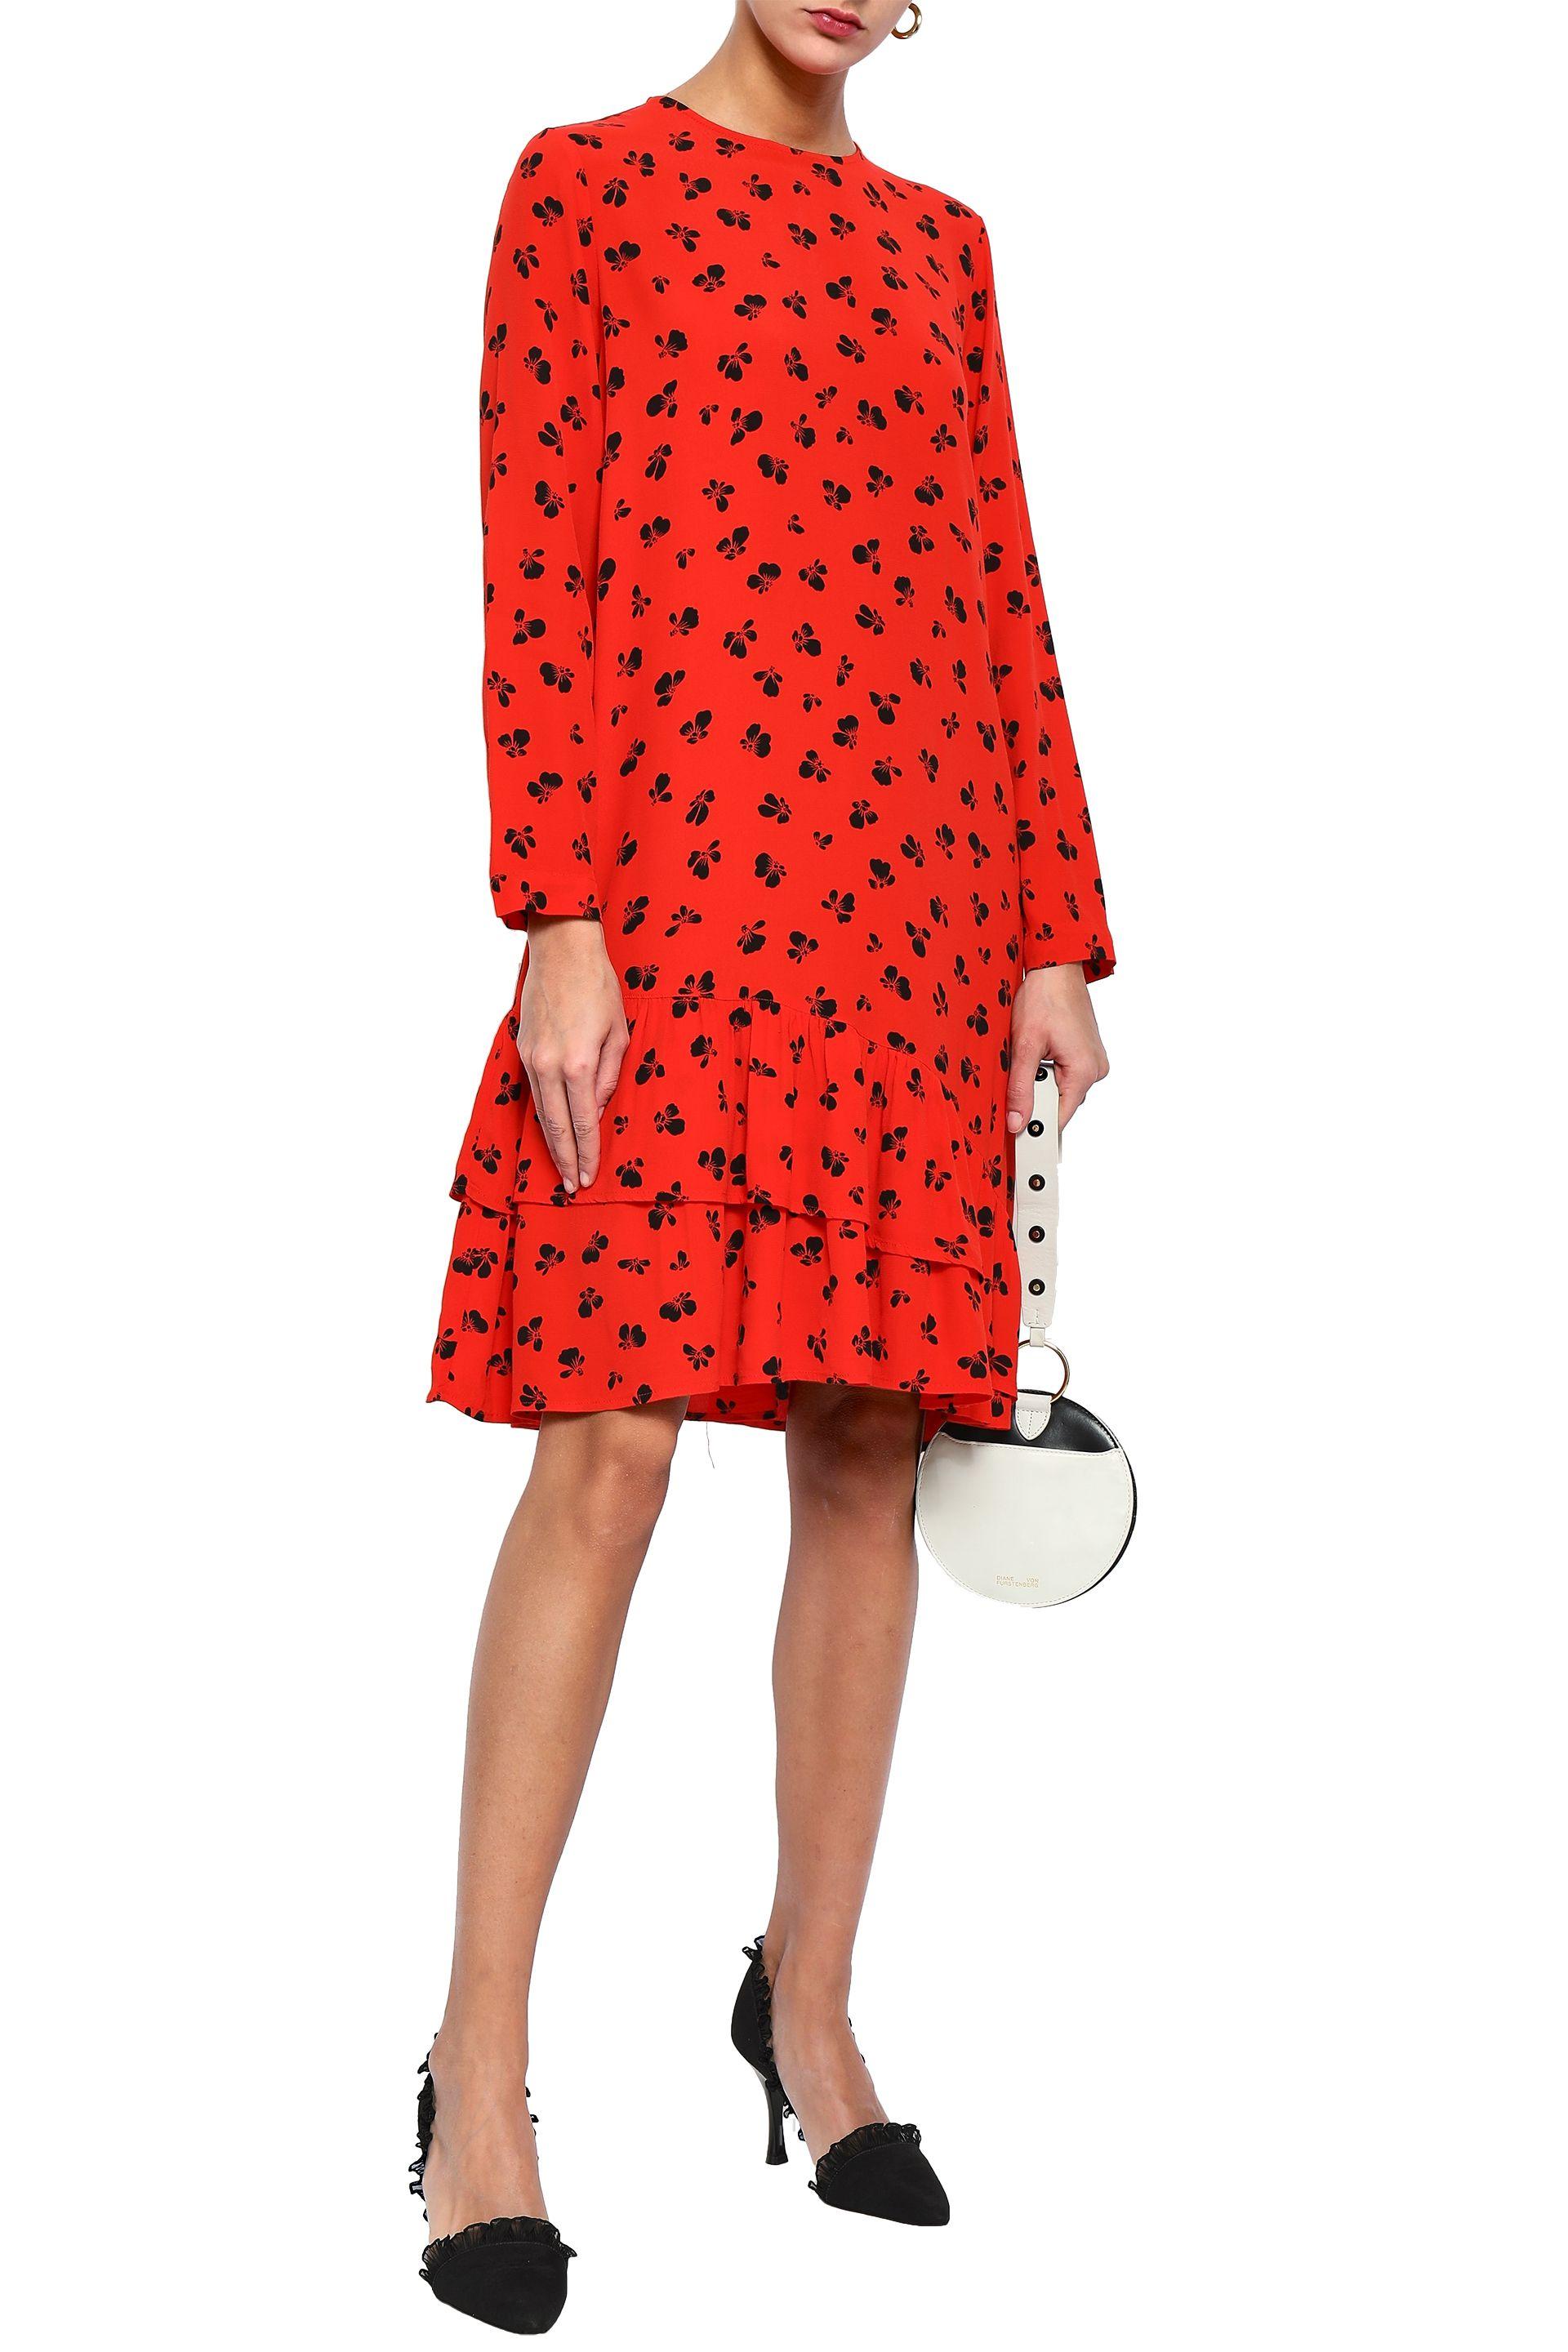 Ganni Synthetic Emory Printed Crepe De Chine Mini Dress in Red - Lyst